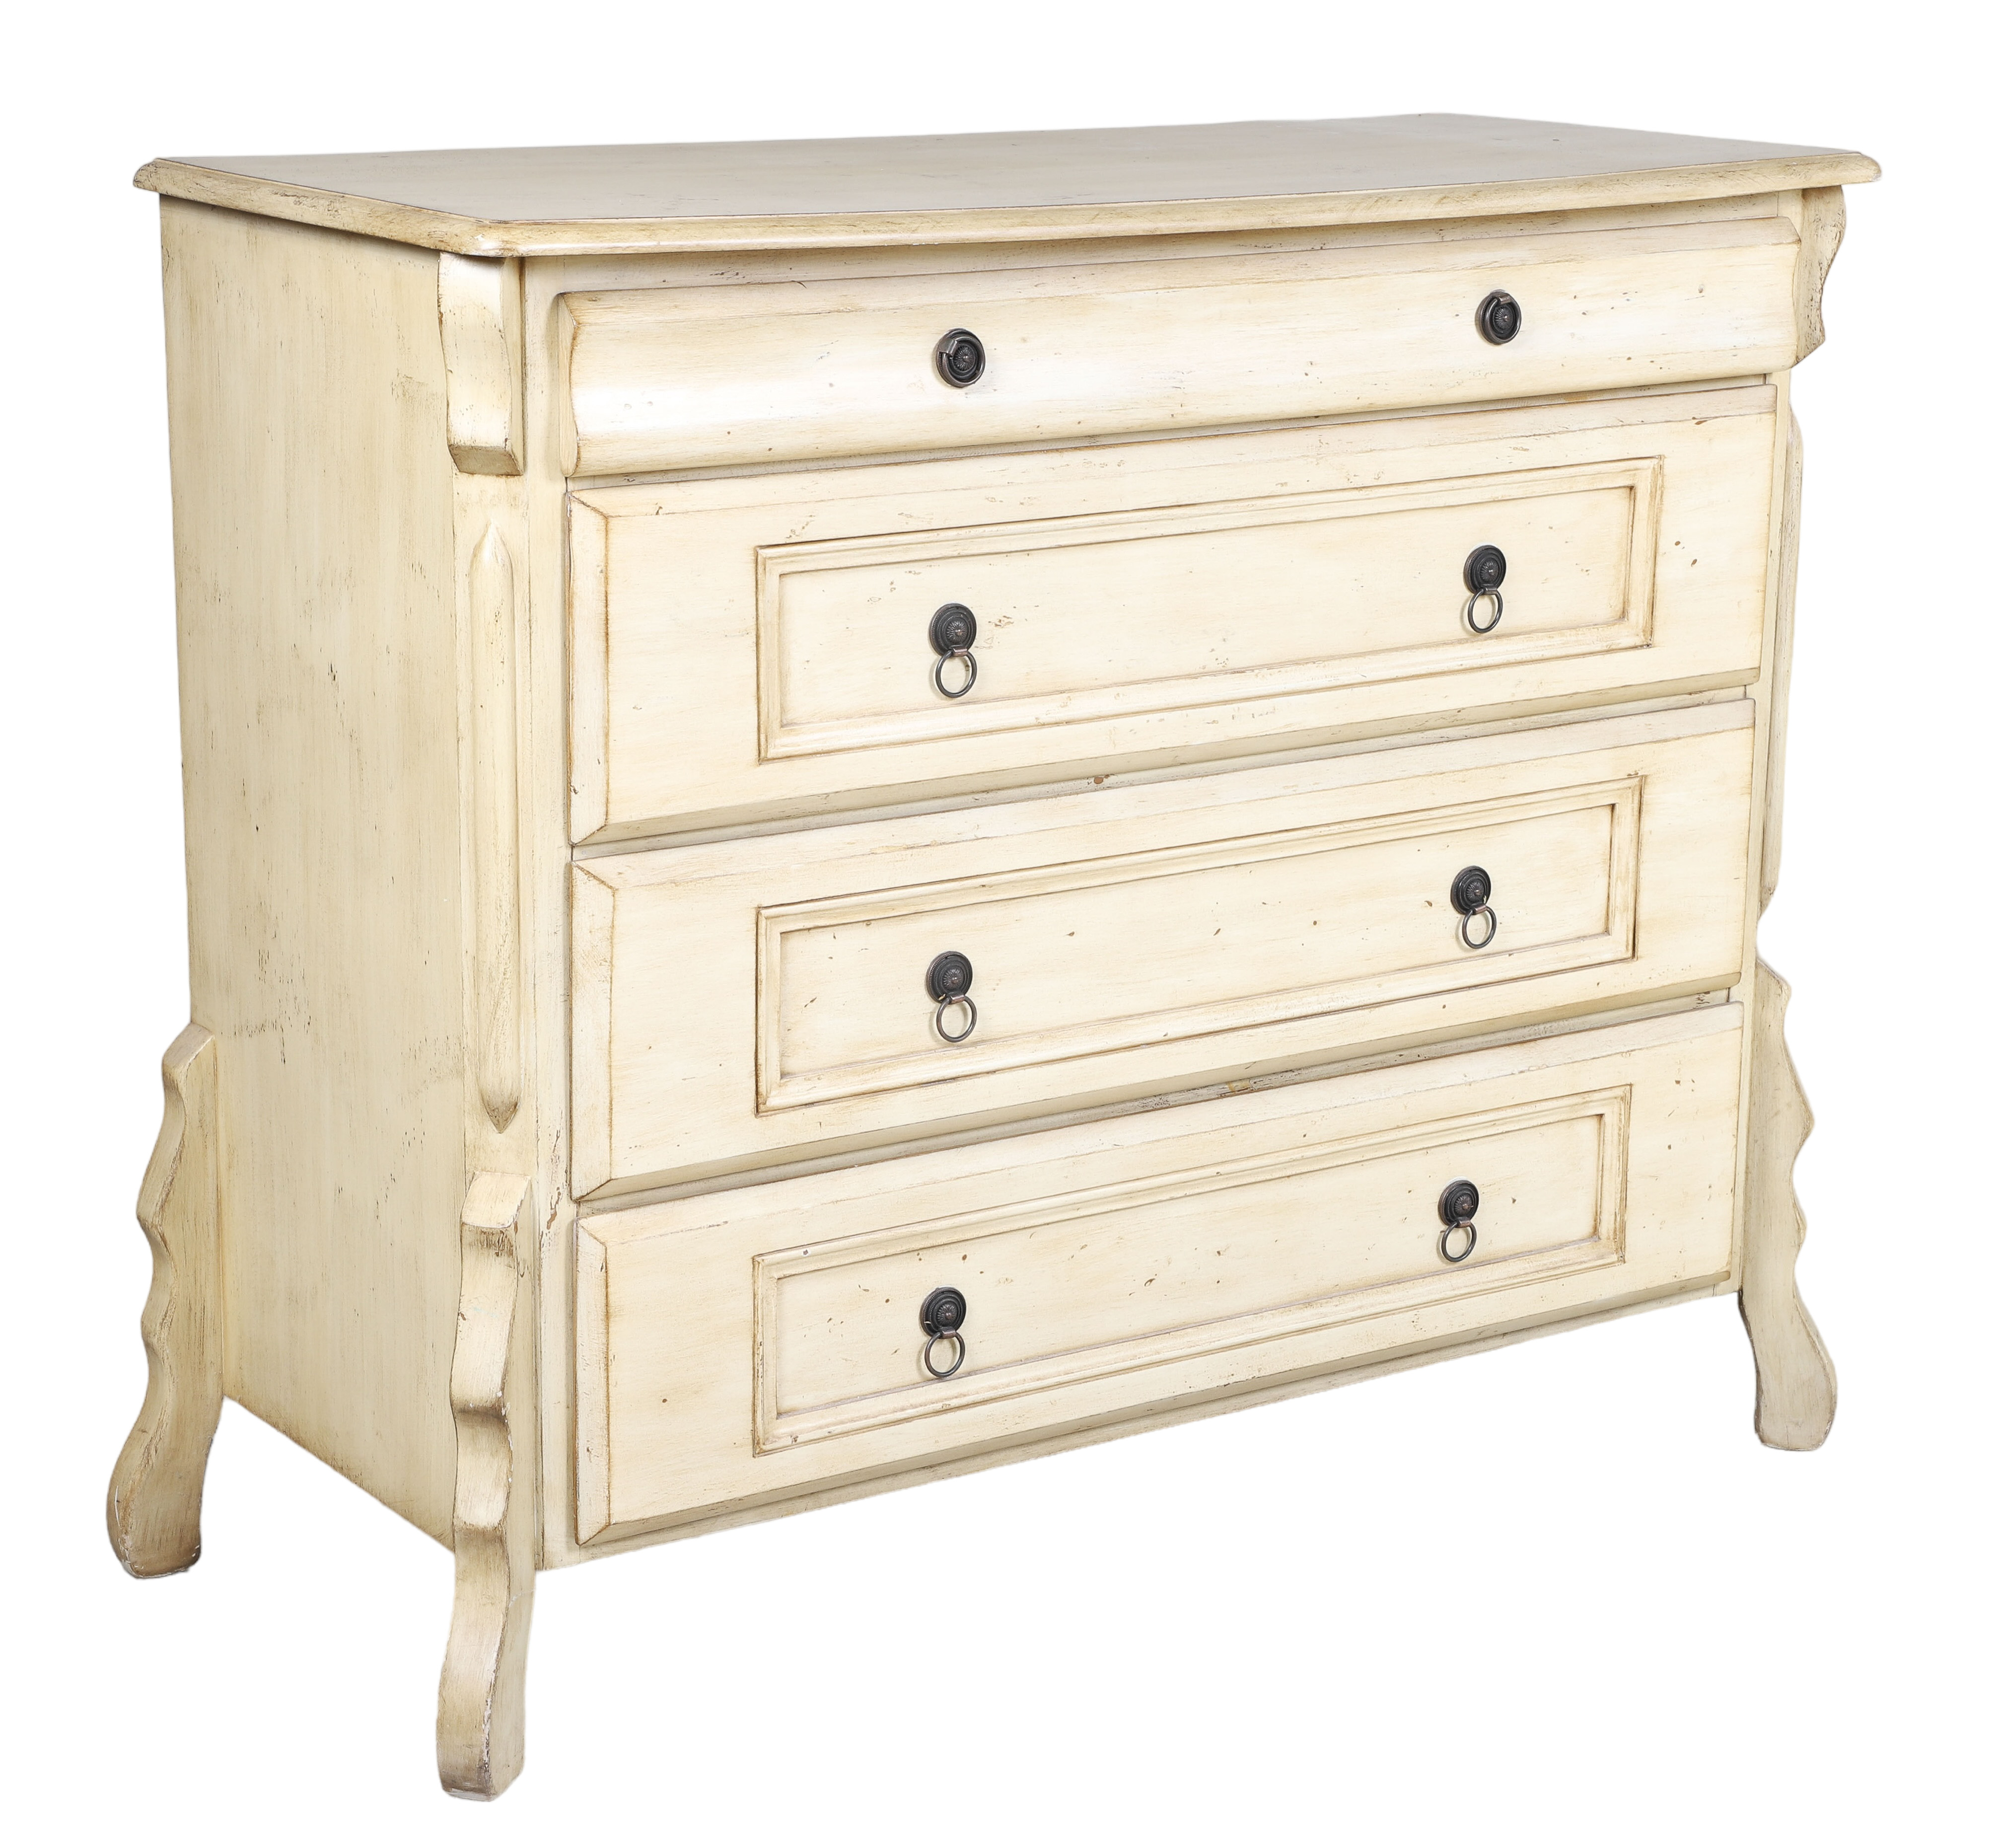 Contemporary paint decorated chest 2e1dad